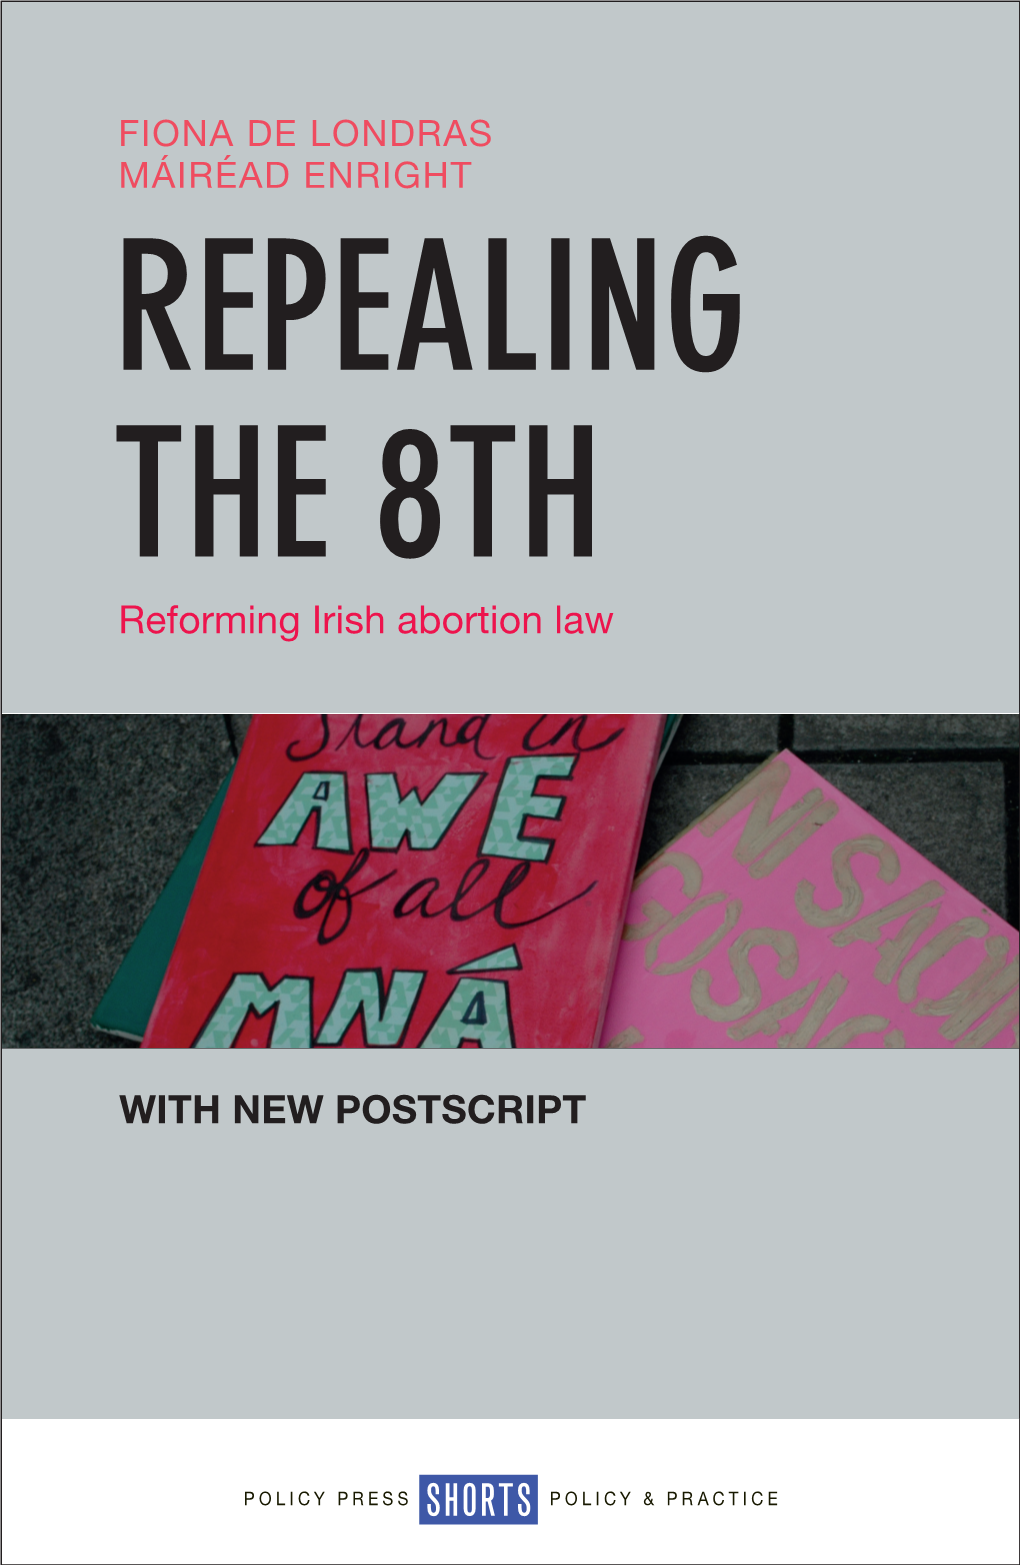 REPEALING the 8TH the 8TH Reforming Irish Abortion Law